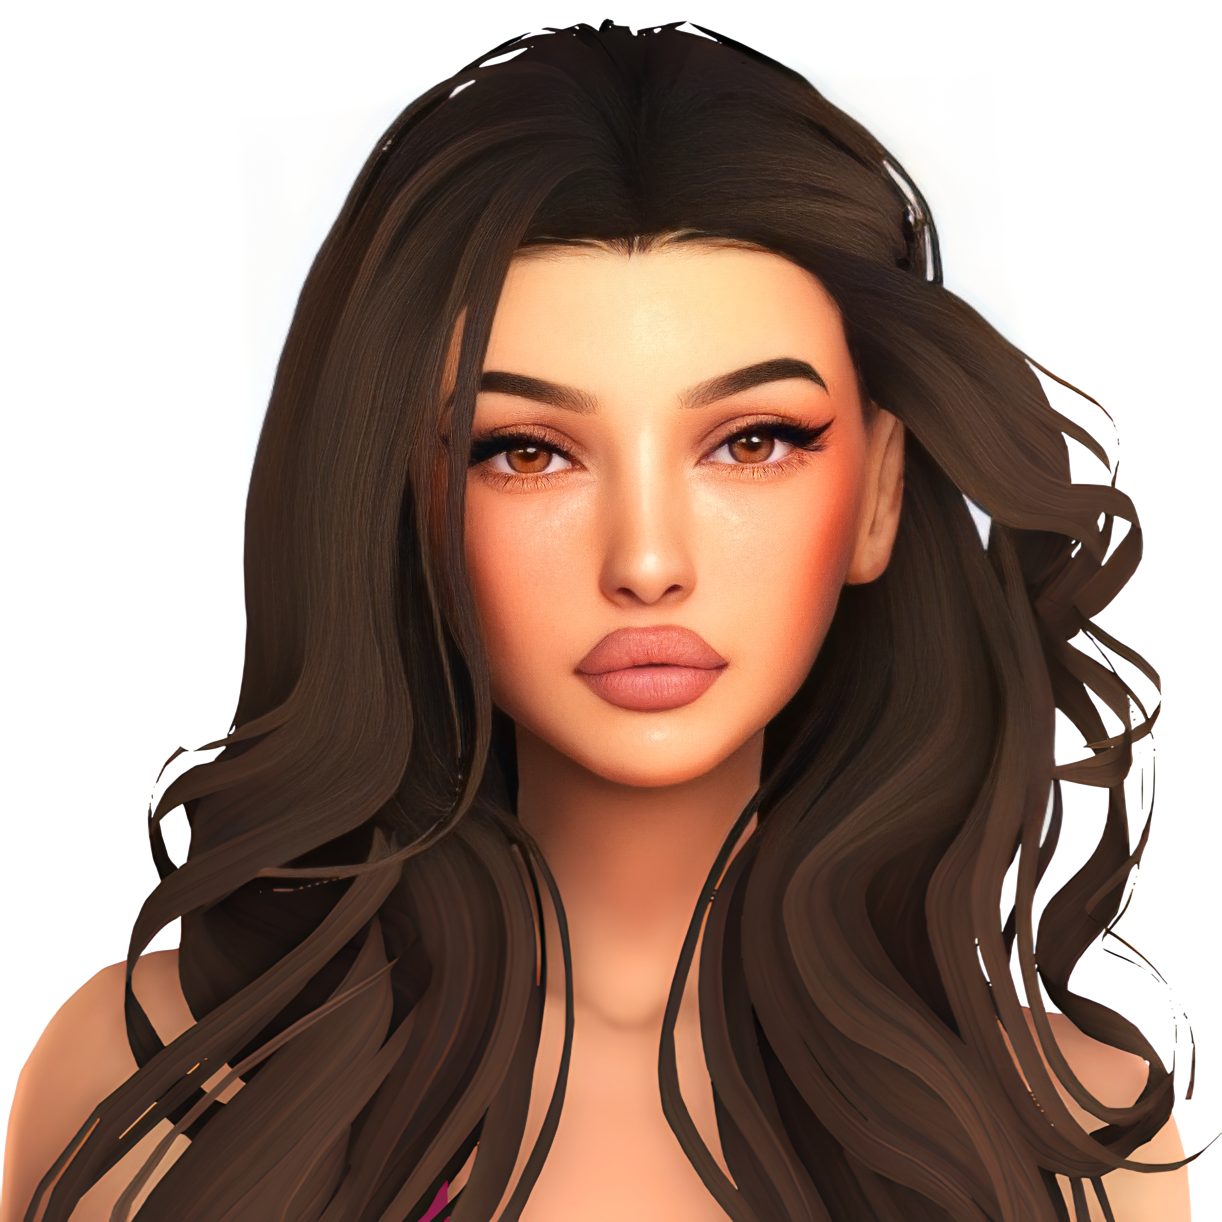 Paulina Grover - The Sims 4 Sims / Households - CurseForge